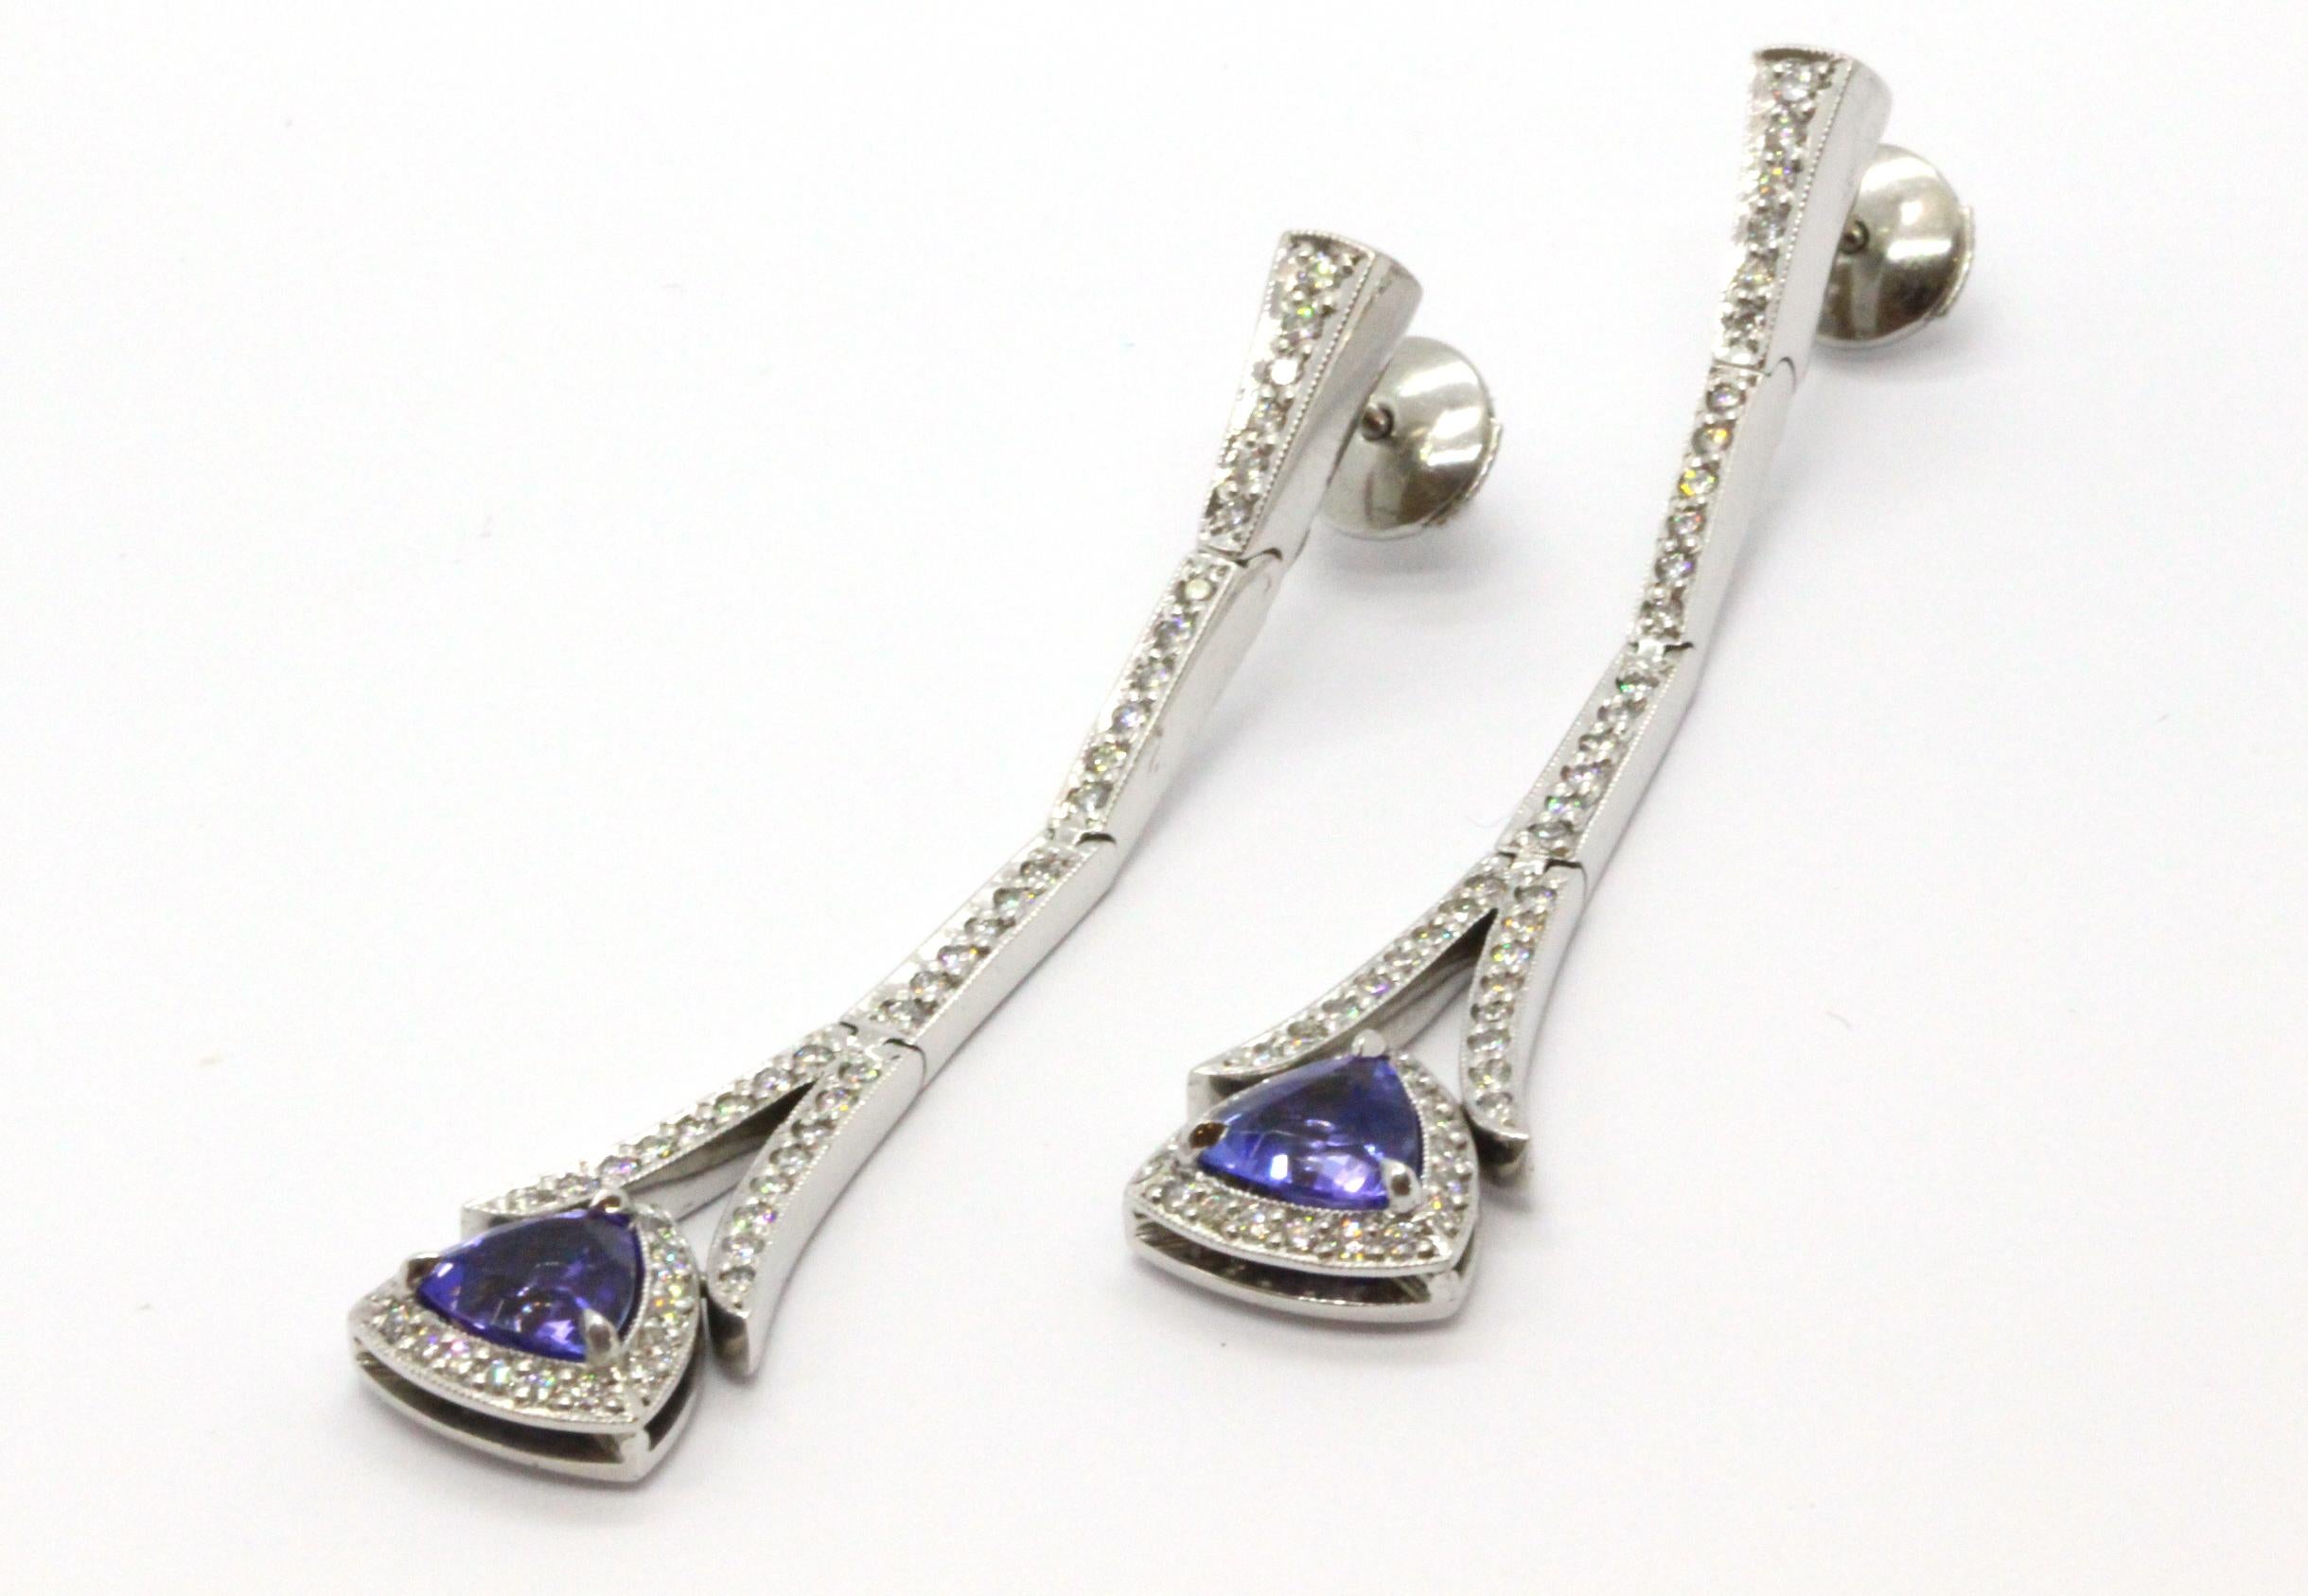 18ct White Gold Handcrafted Tanzanite and Diamond Drop Earrings.

Gemstone Details:
2 = 2.02ct Trilliant Cut Tanzanites
104 = 0.94ct Round Brilliant Cut Diamonds, Colour F/G, Clarity VS1

The Tanzanites are three claw set and are surrounded by a